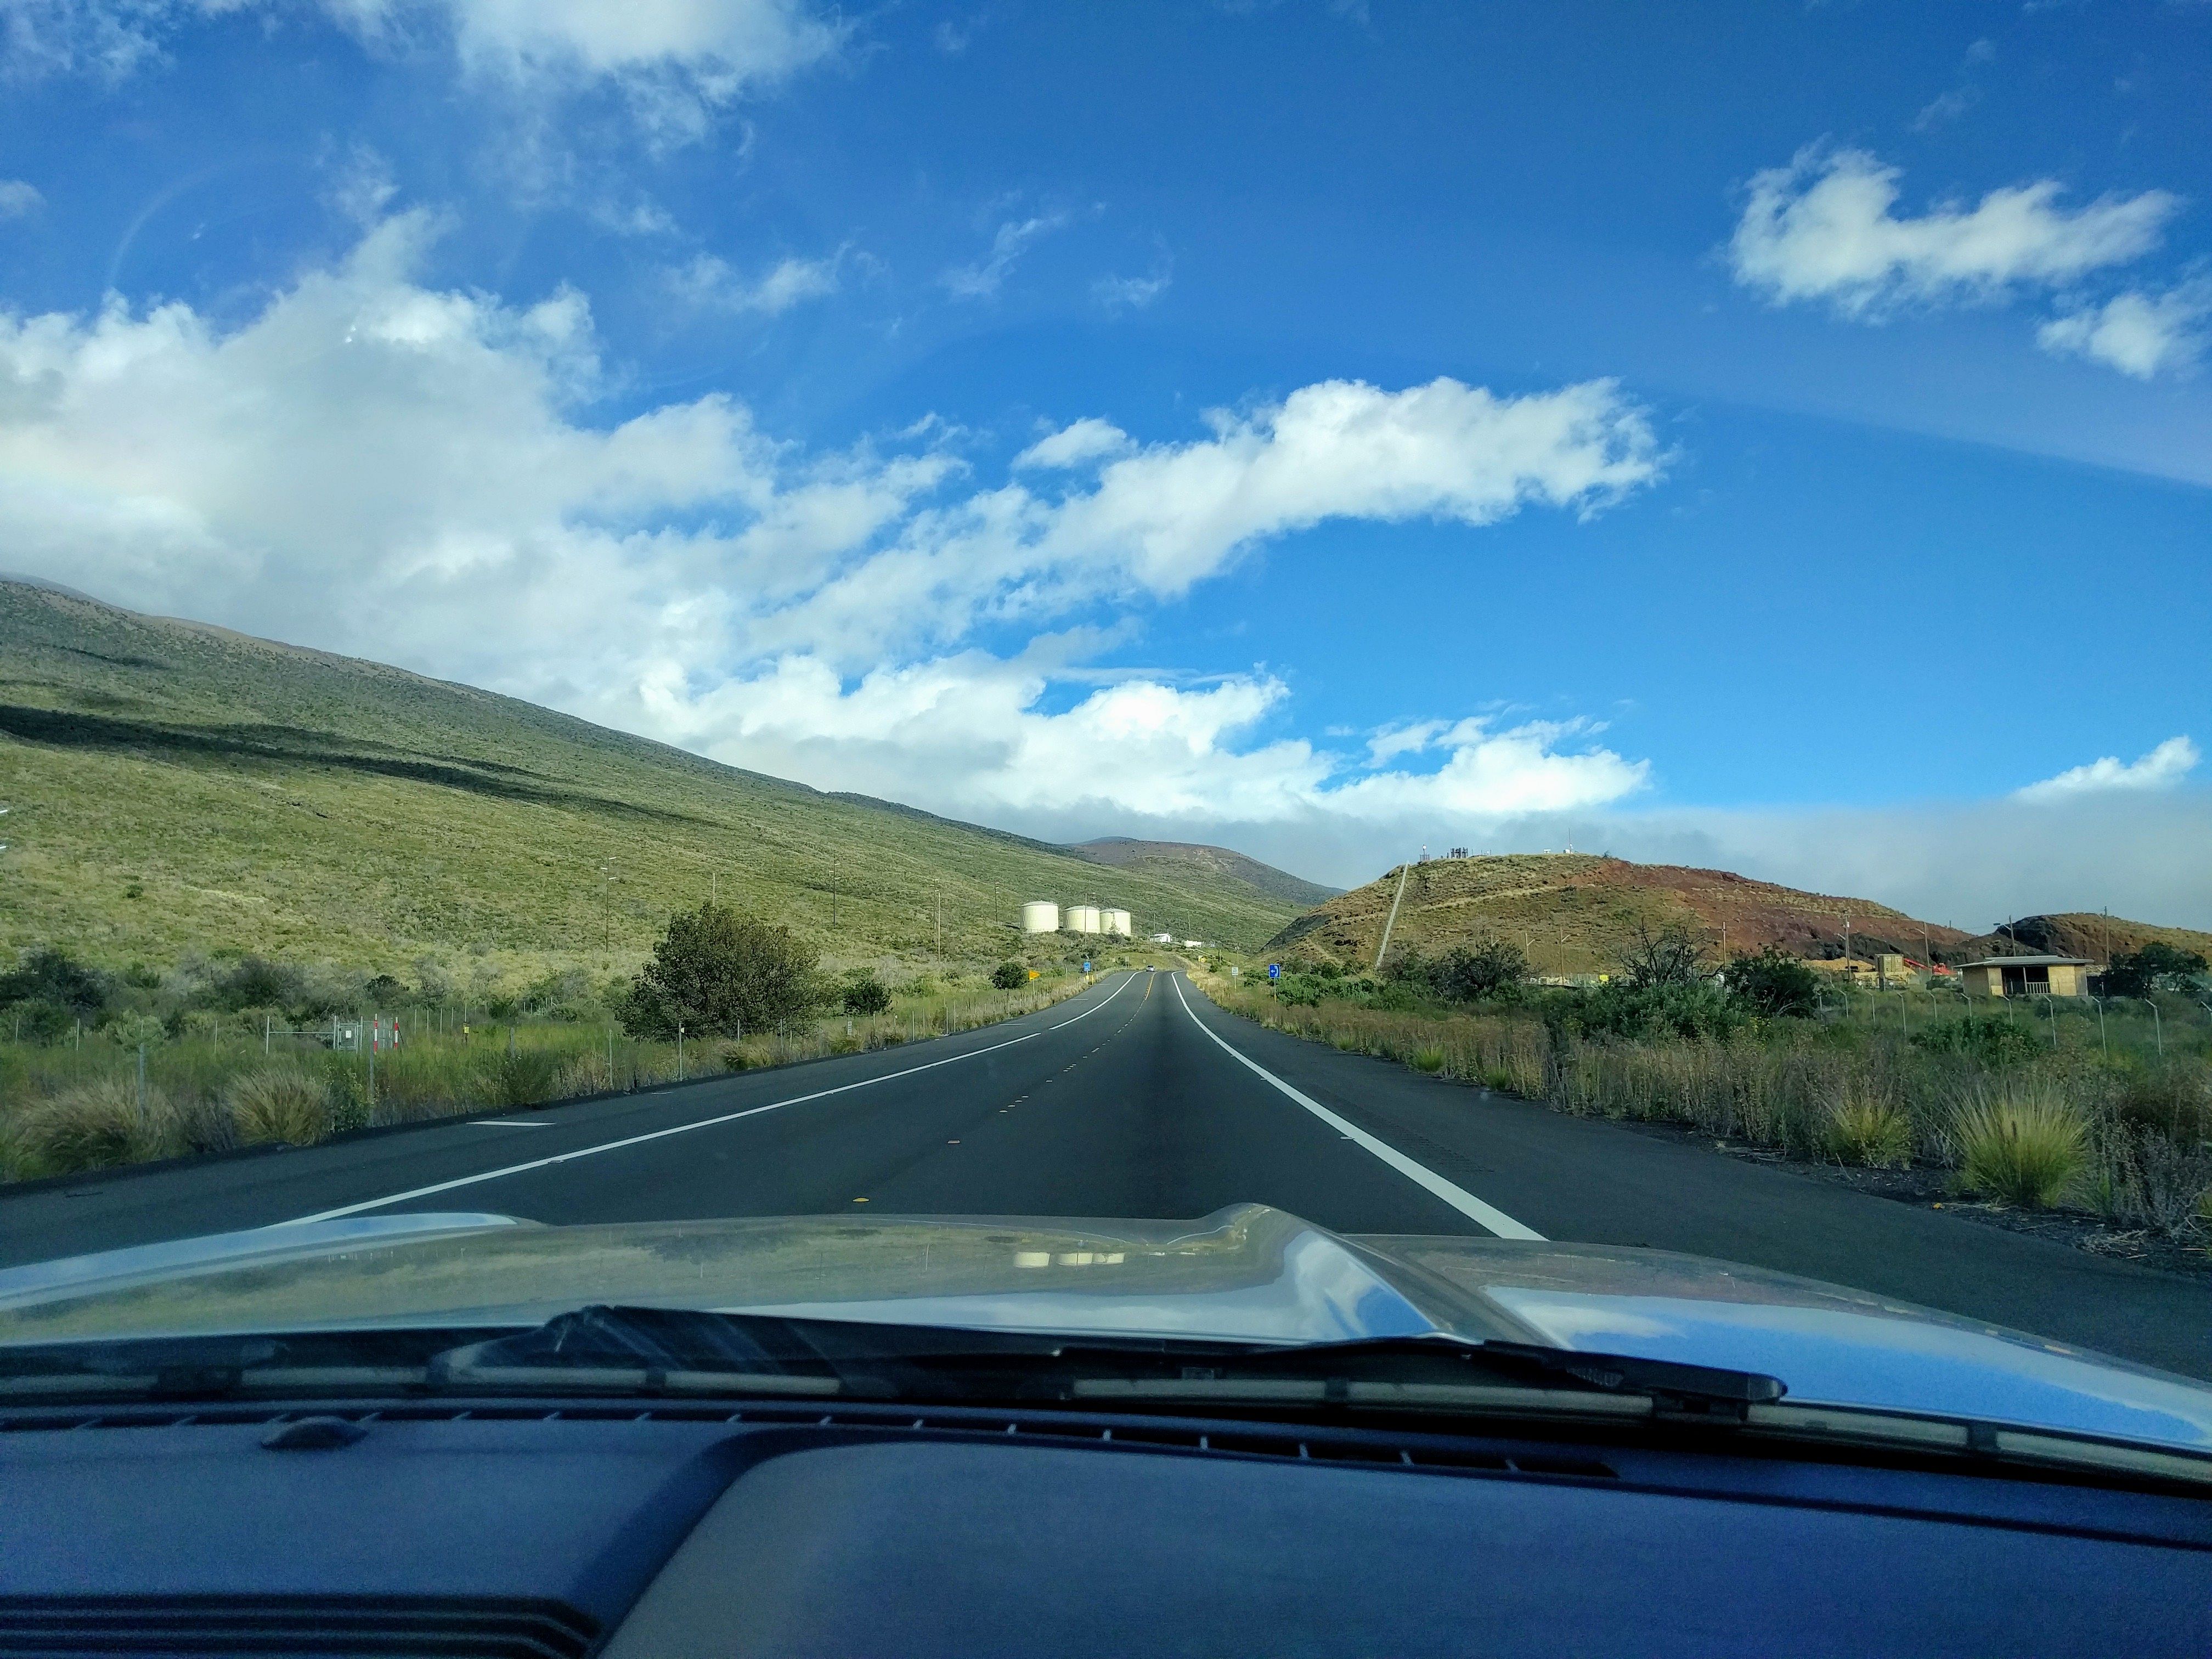 View of the road and mountains through car windshield.